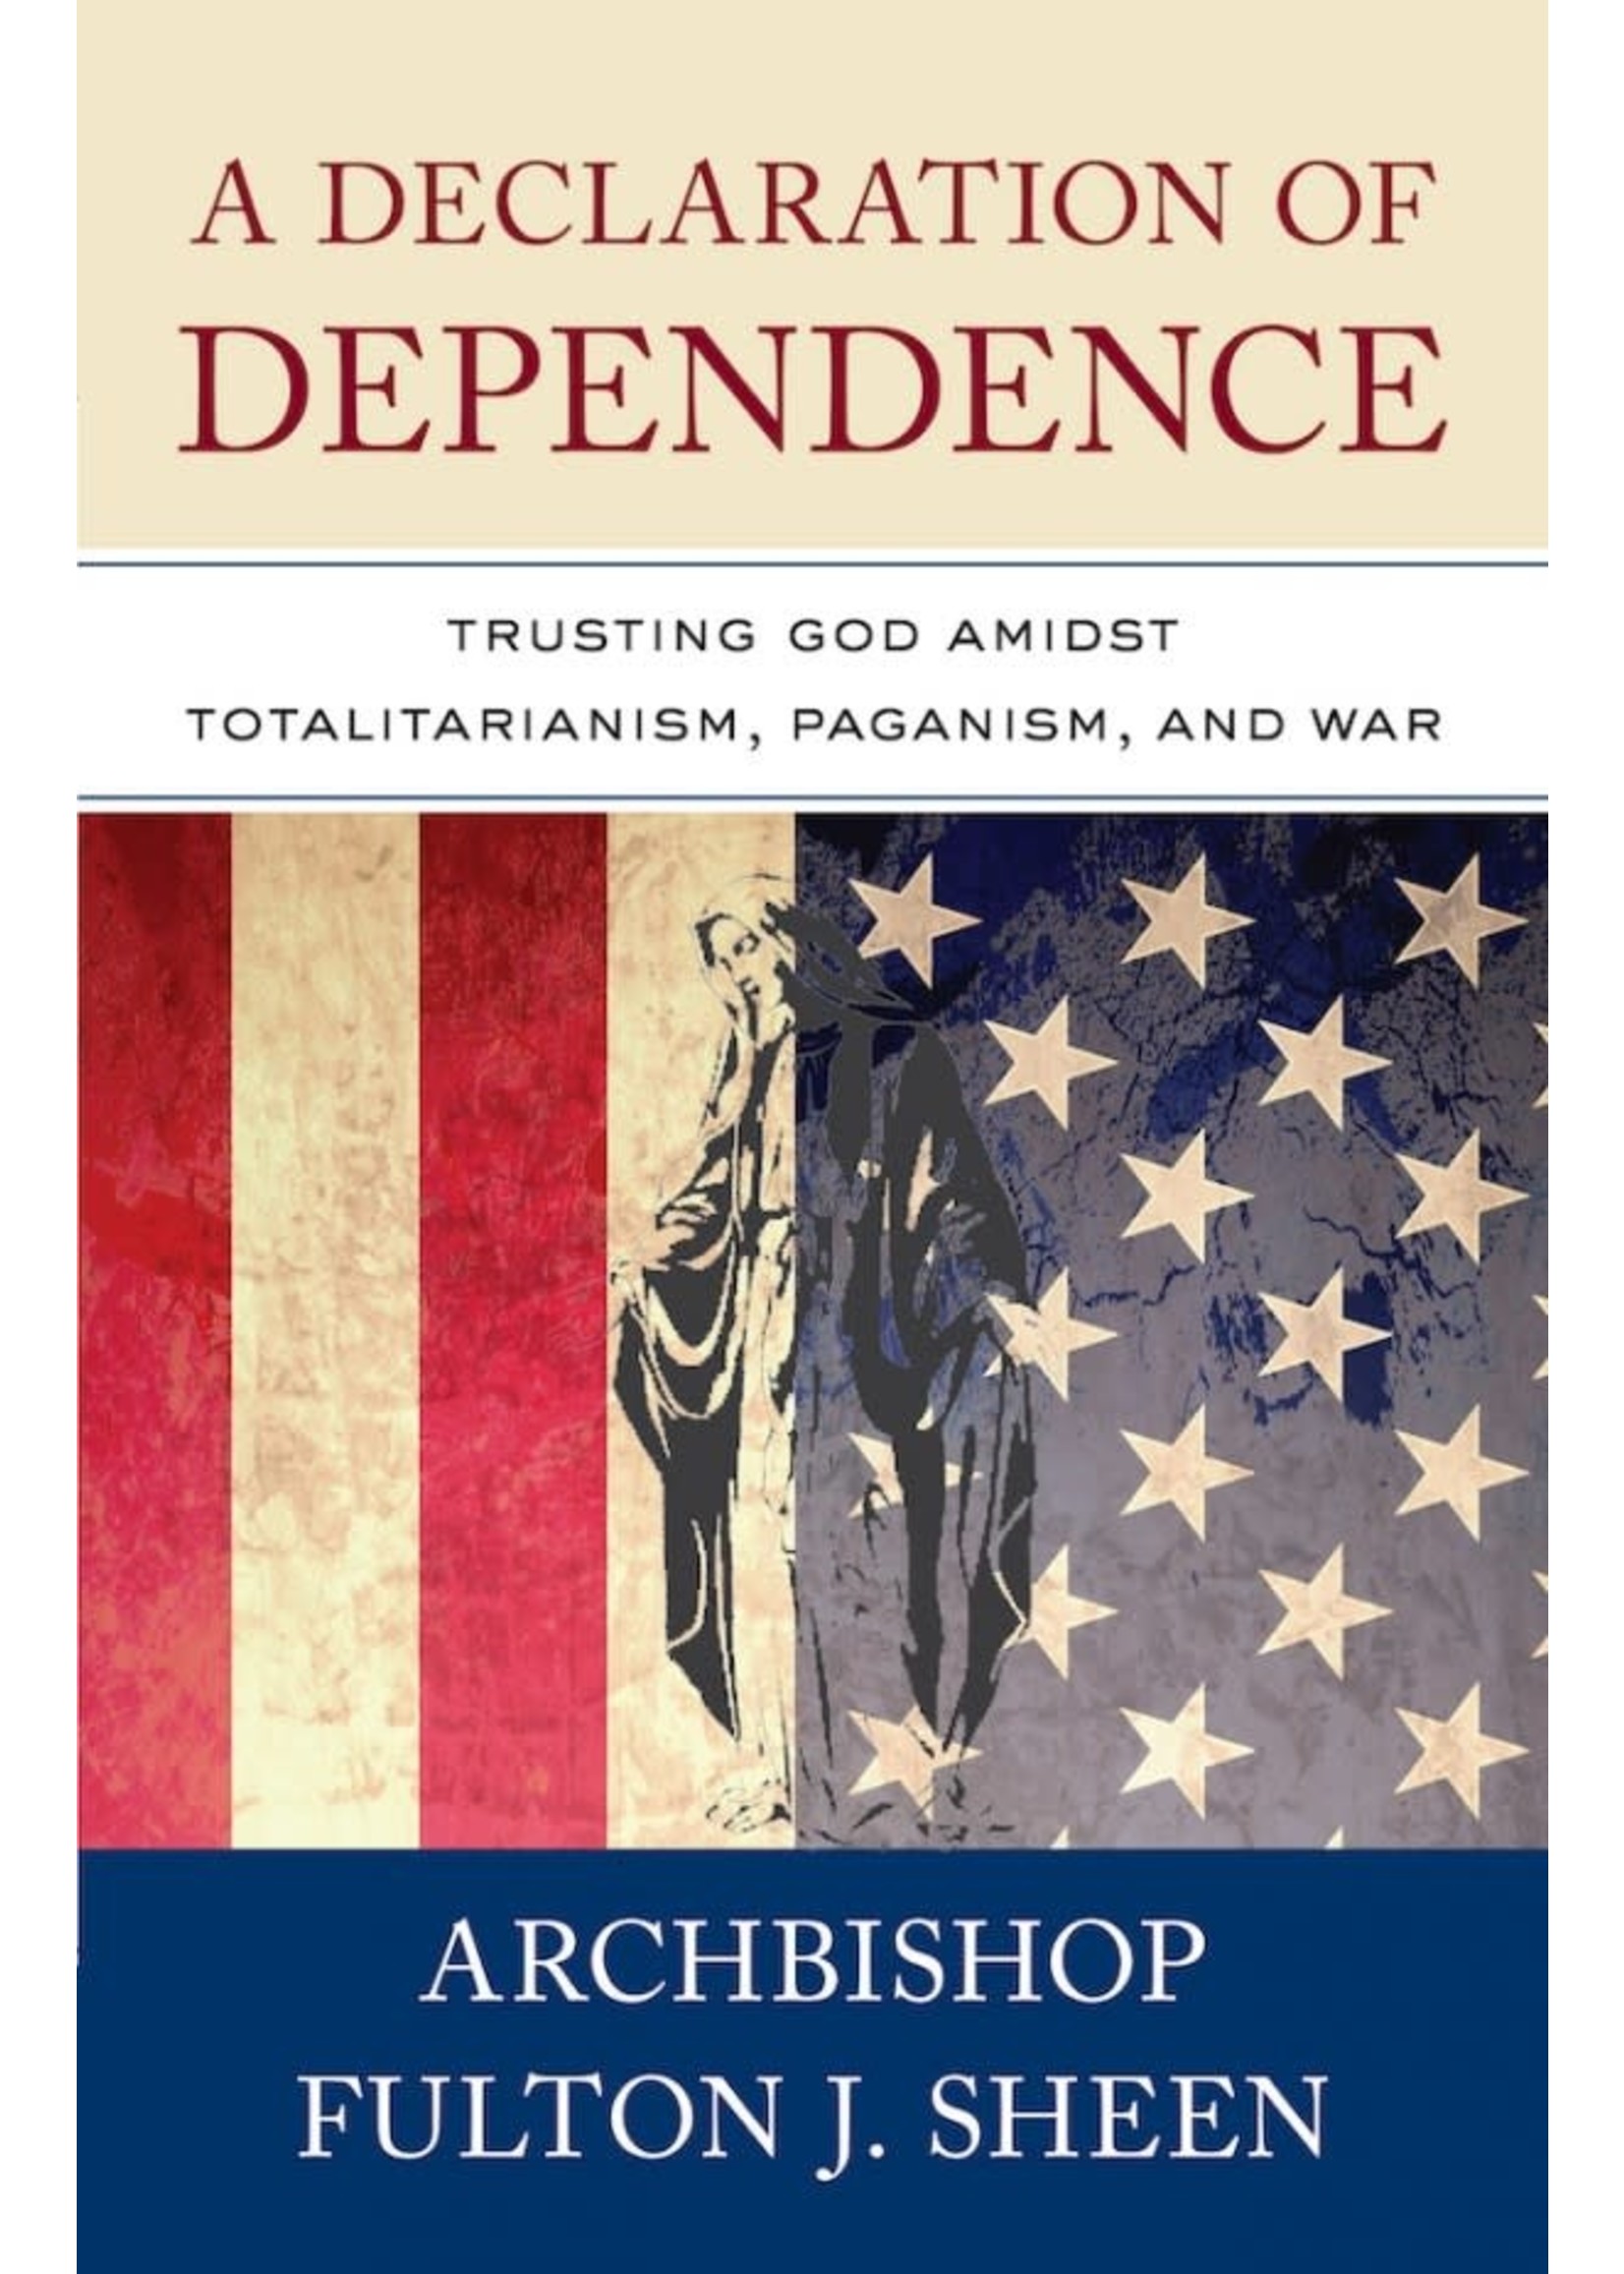 A Declaration of Dependence: Trusting God Amidst Totalitarianism, Paganism, and War